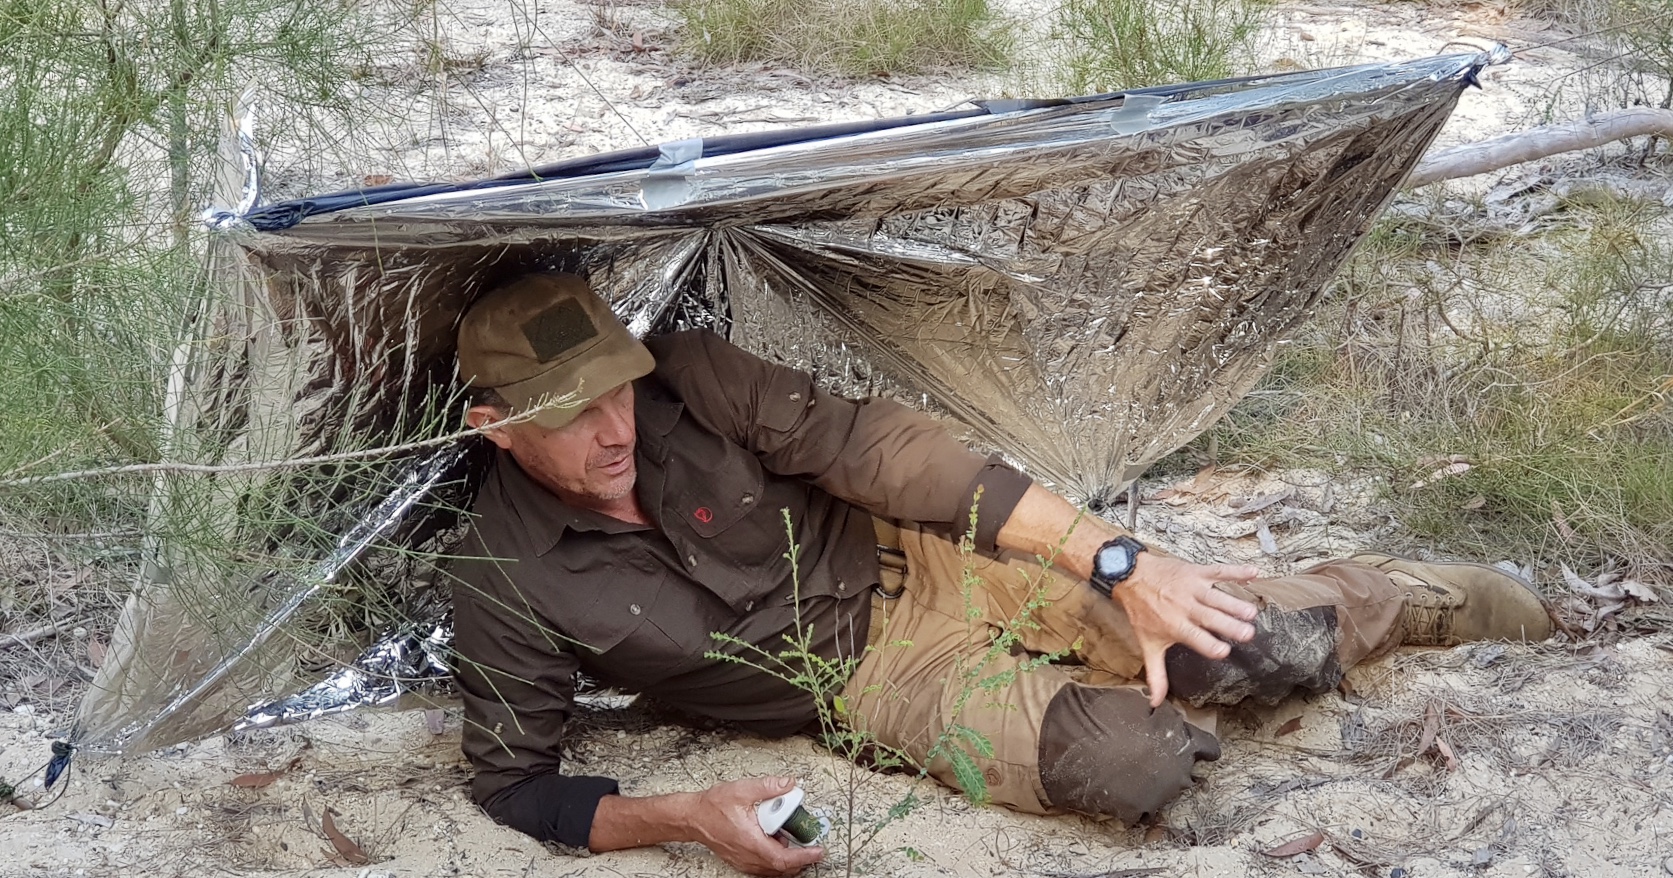 Surviving in the Australian Bush with No Food, Water or Shelter